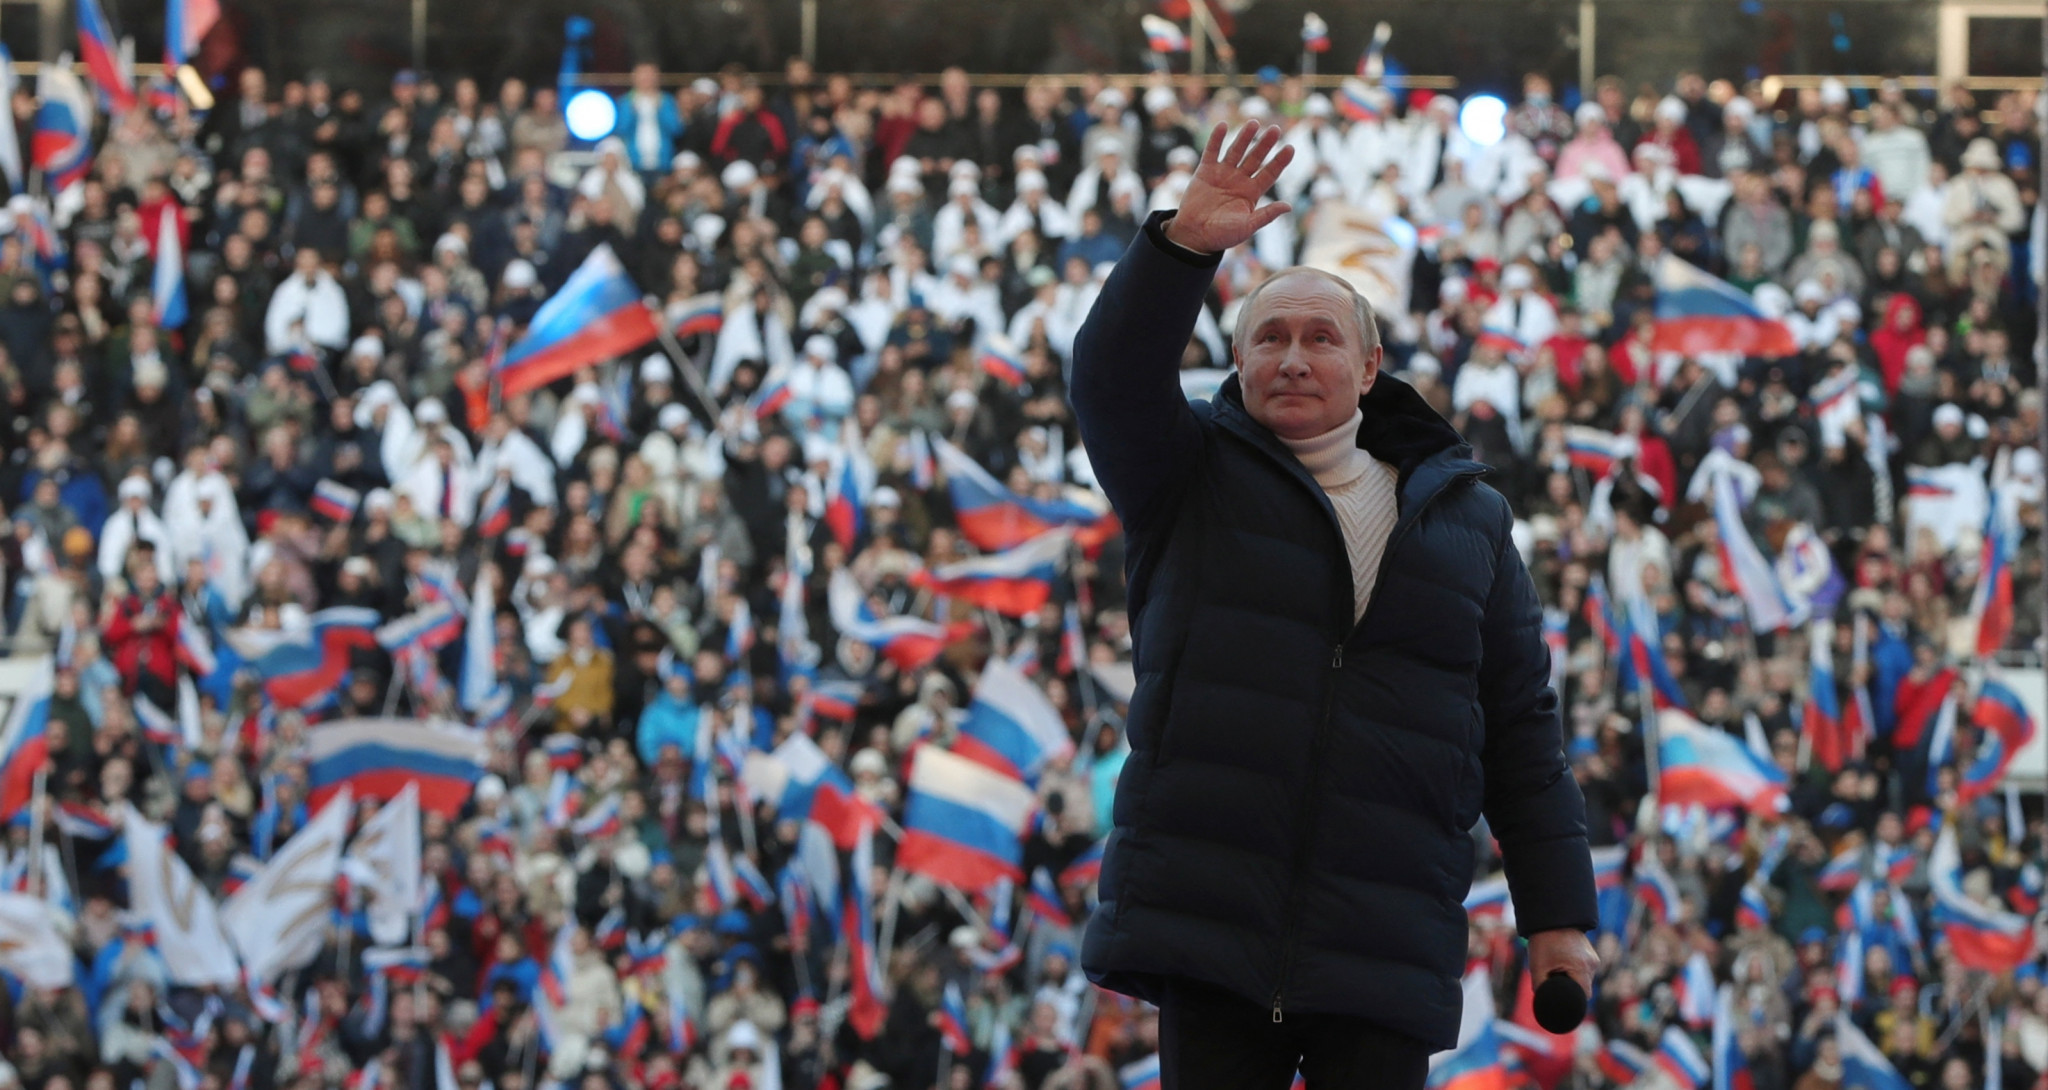 Putin holds large pro-war rally featuring Russian Olympians at Luzhniki Stadium in Moscow